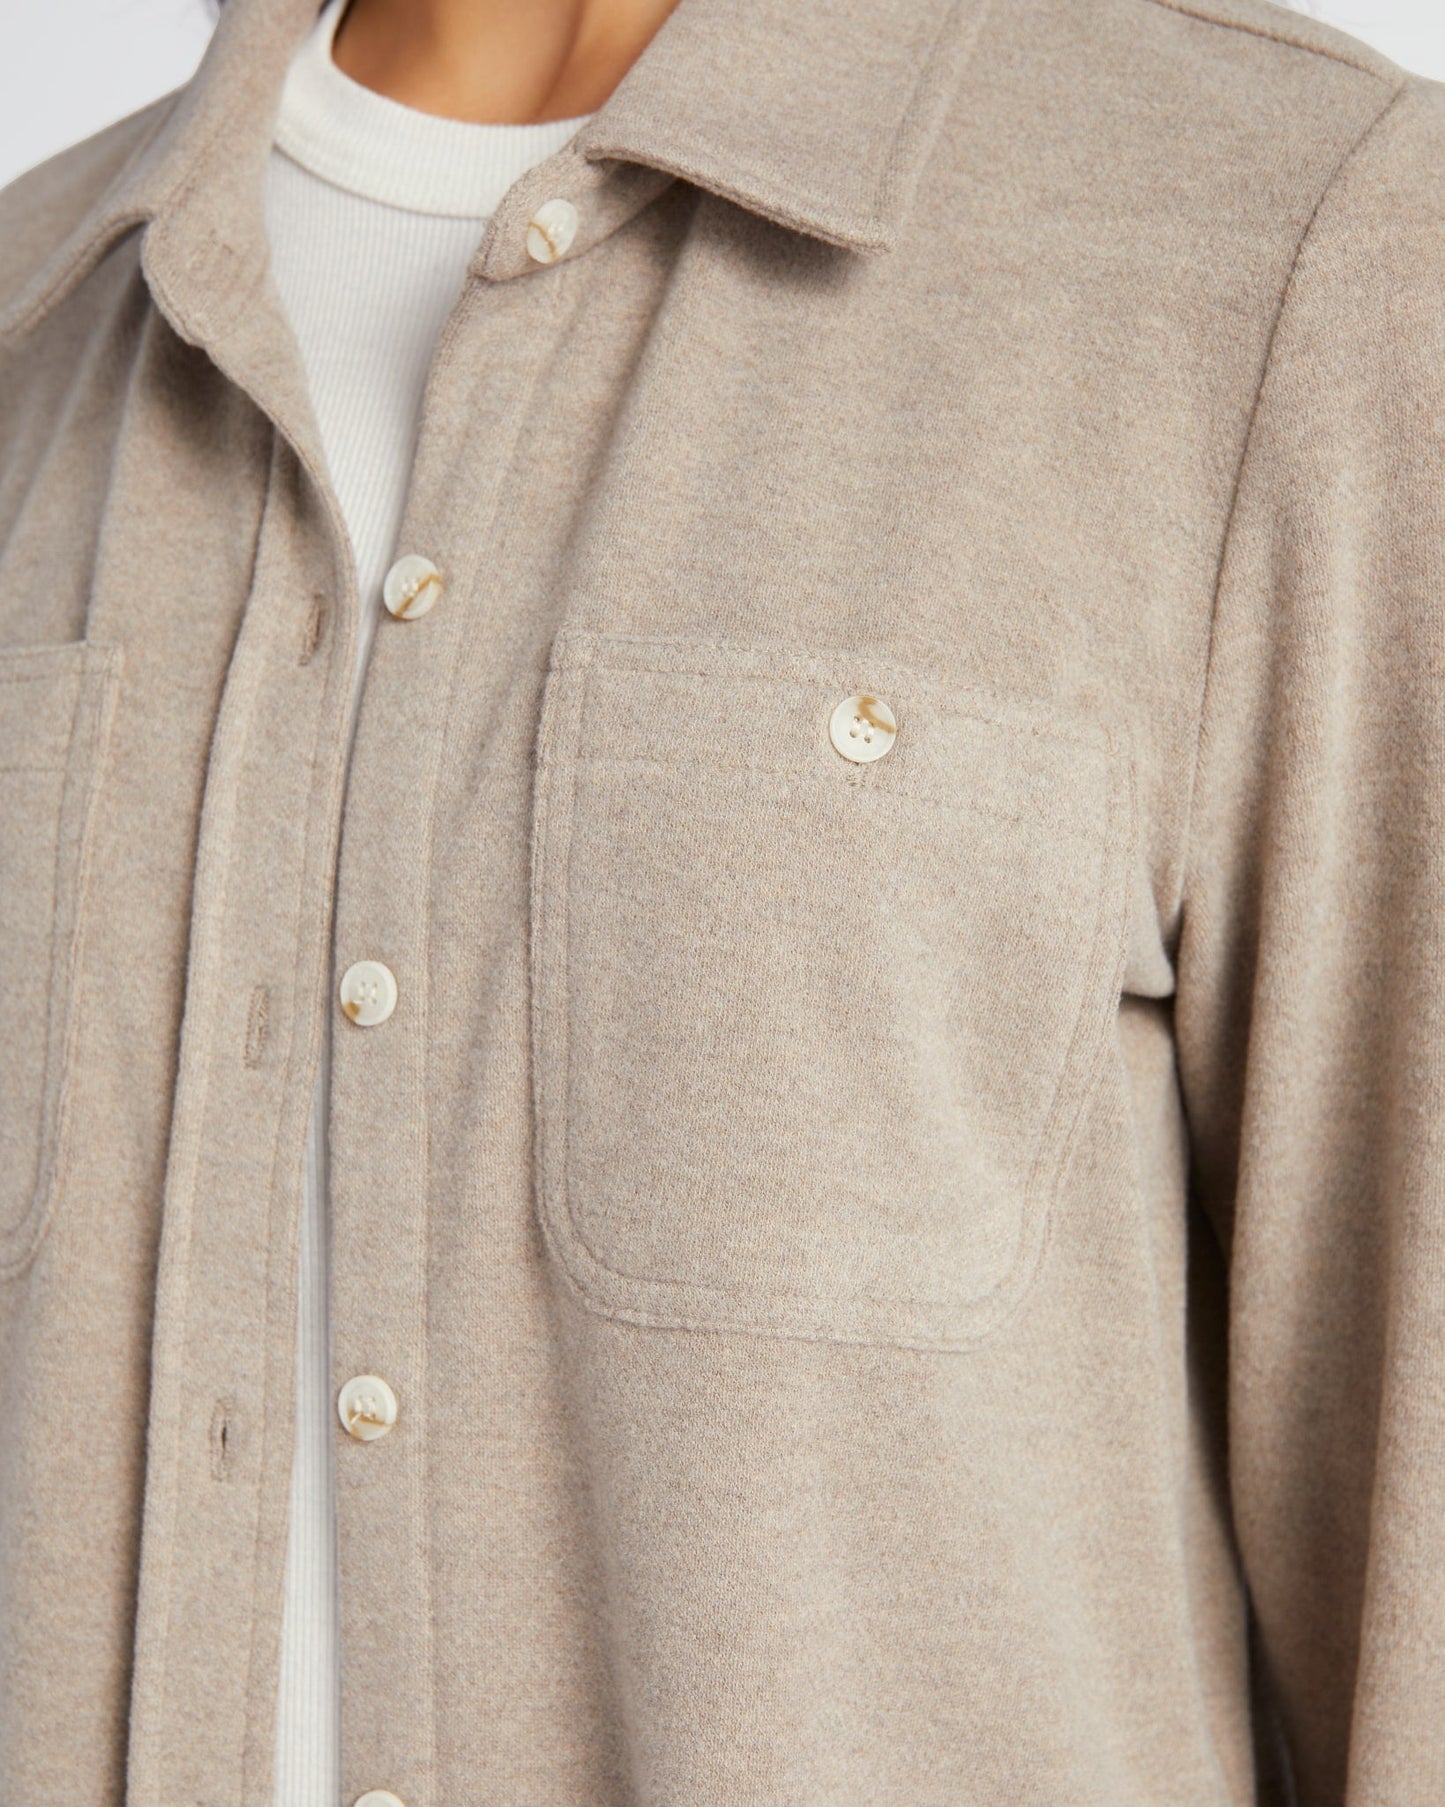 Lewis Shirt - Taupe Color